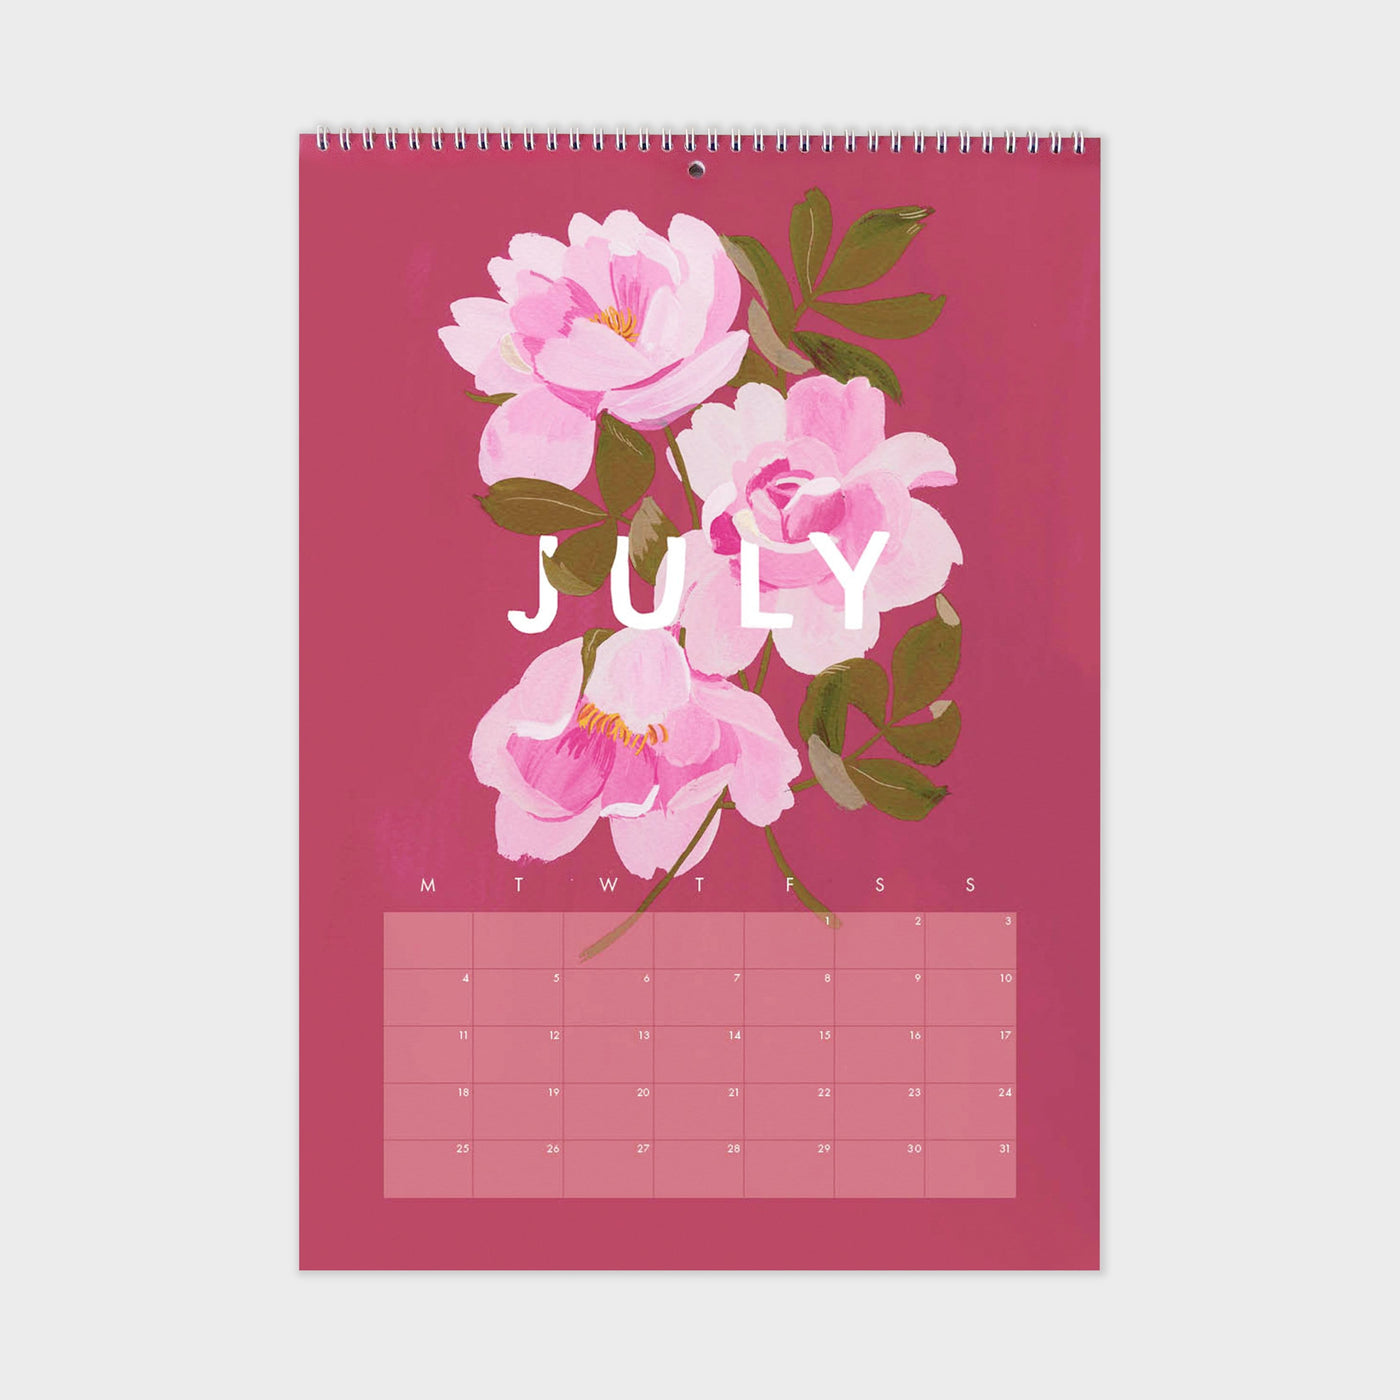 the "July" page - featuring pink roses on a hot pink background